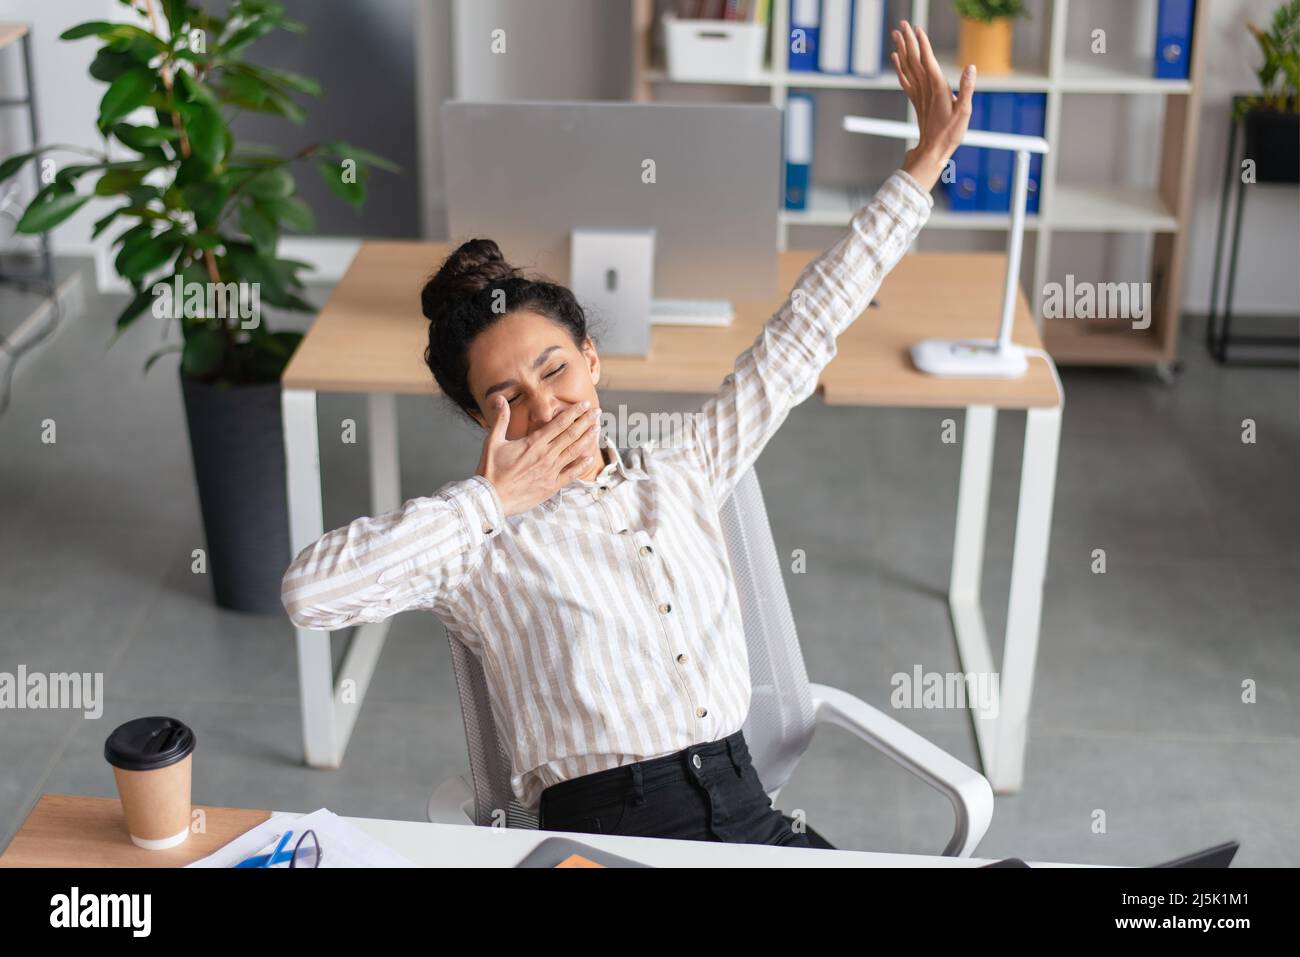 Sleepy young businesswoman yawning and stretching, tired of working in office, feeling sleepy at workplace, copy space Stock Photo